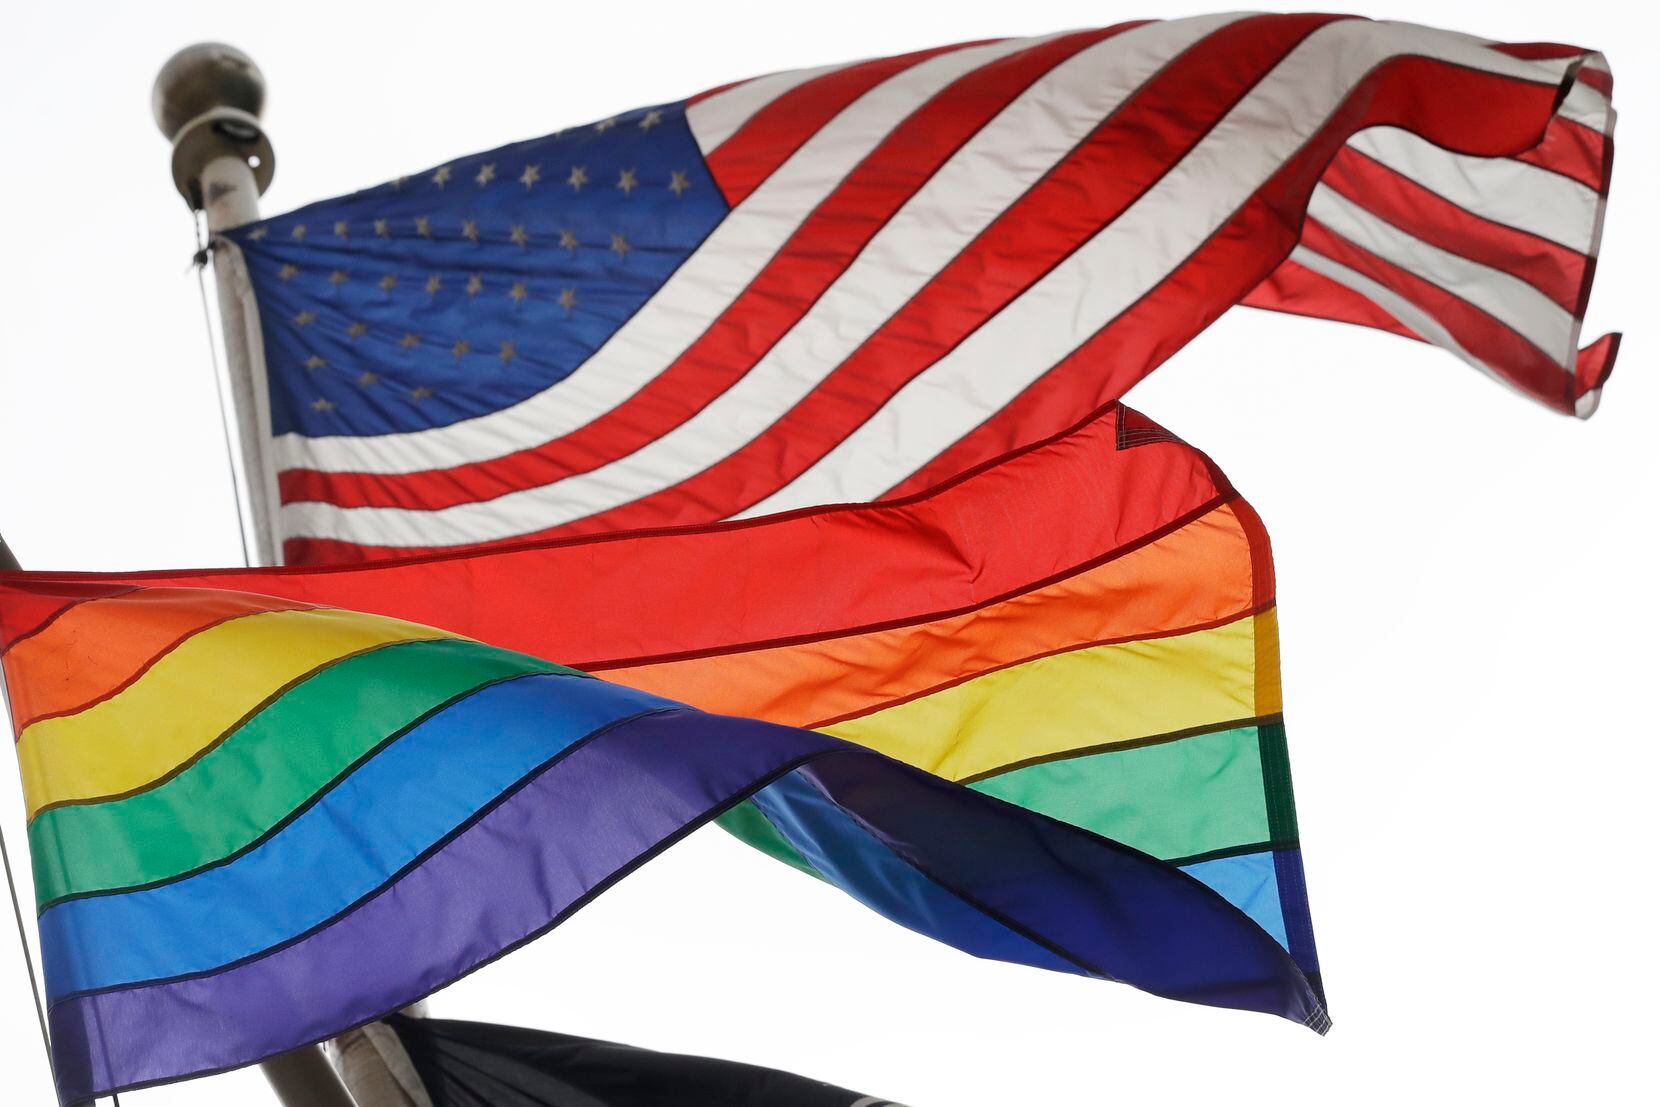 The U.S. flag and the rainbow flag, an international symbol of LGBTQ liberation and pride,...